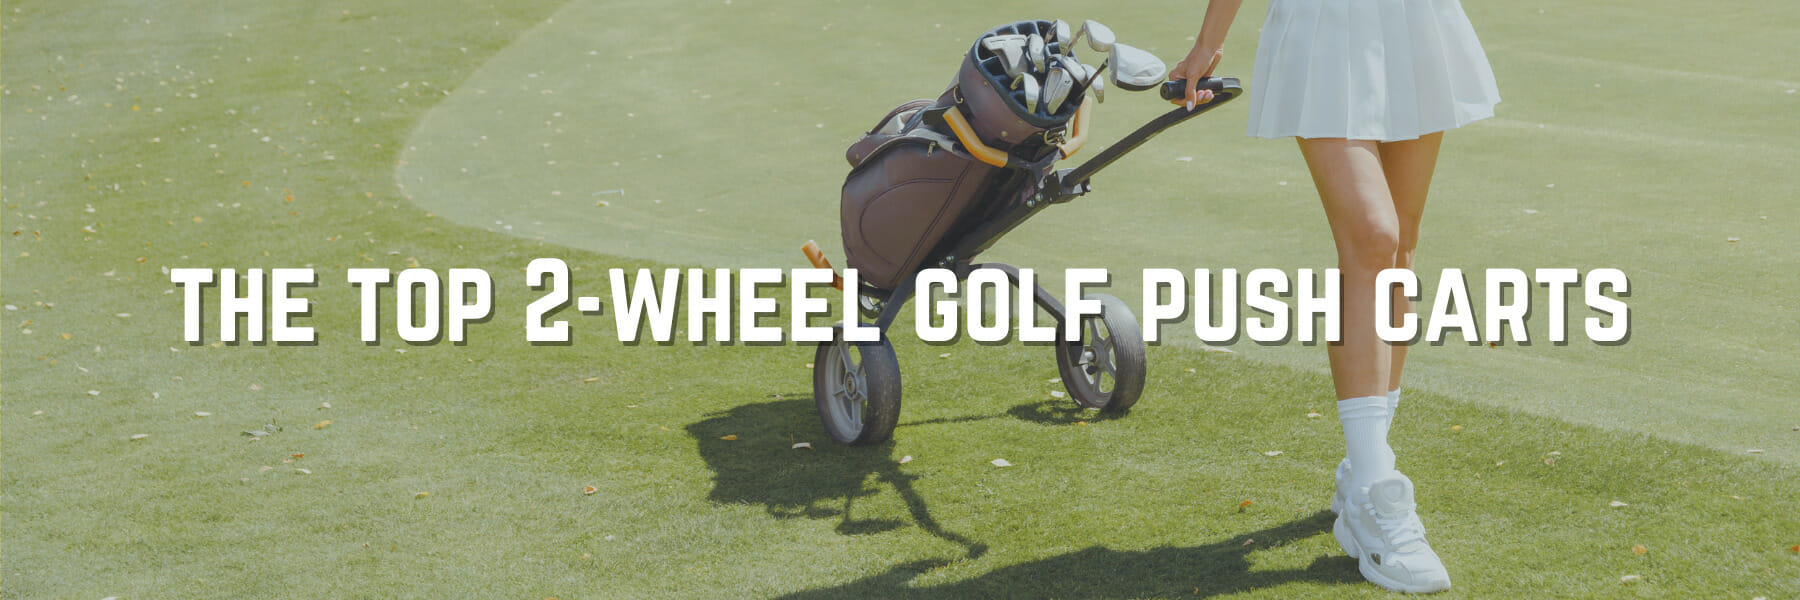 The Best 2-Wheel Golf Push Carts For The Course